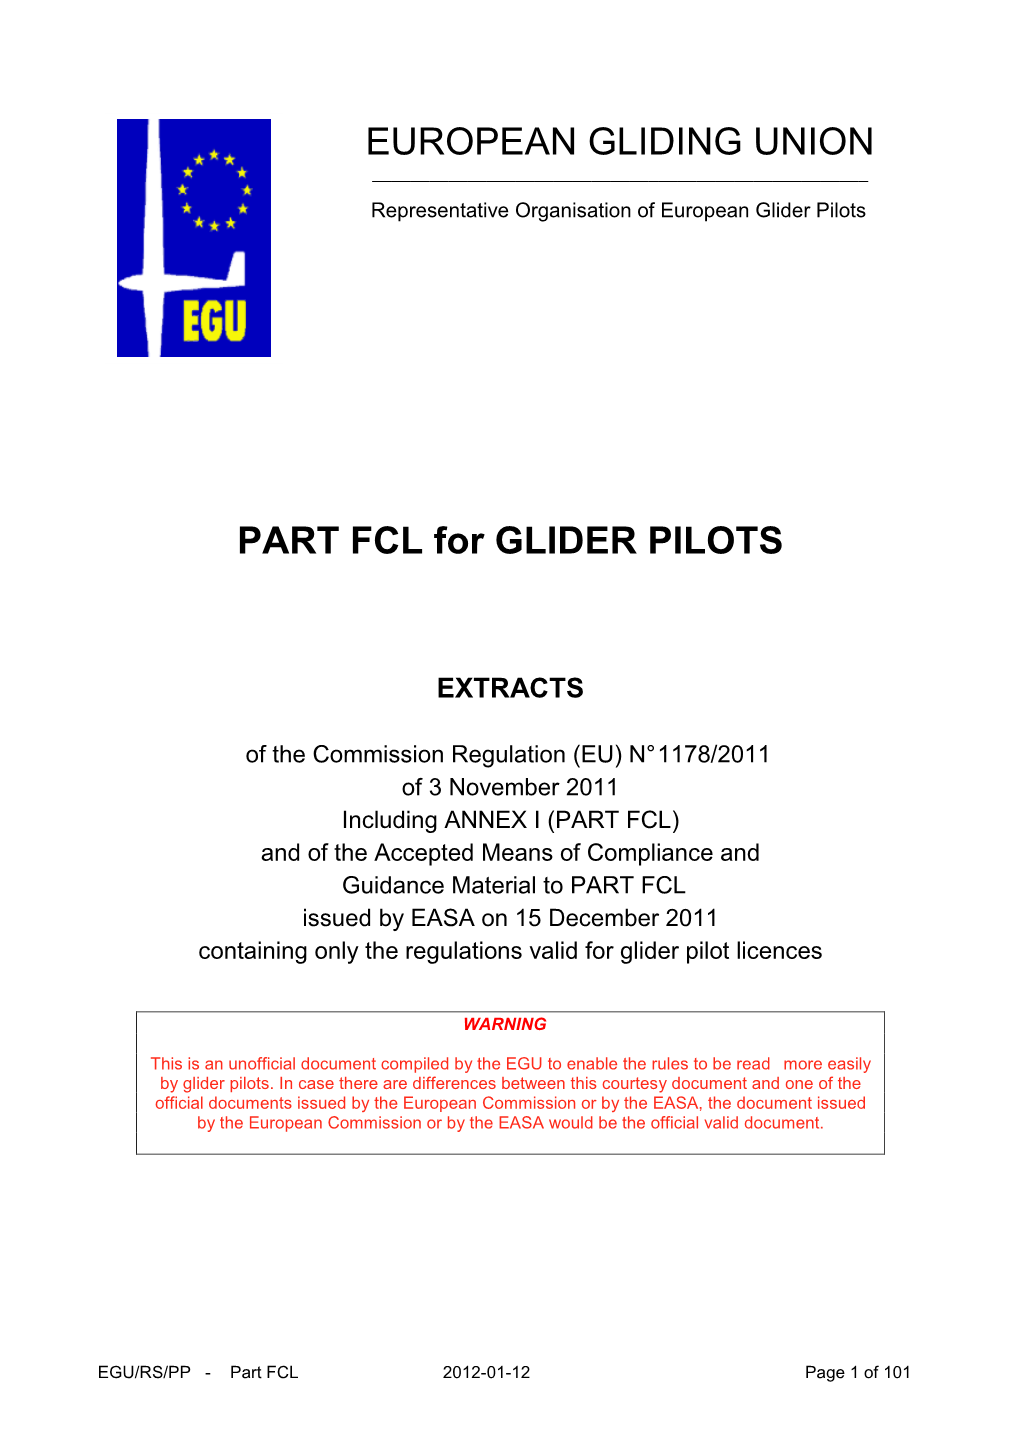 PART FCL for GLIDER PILOTS